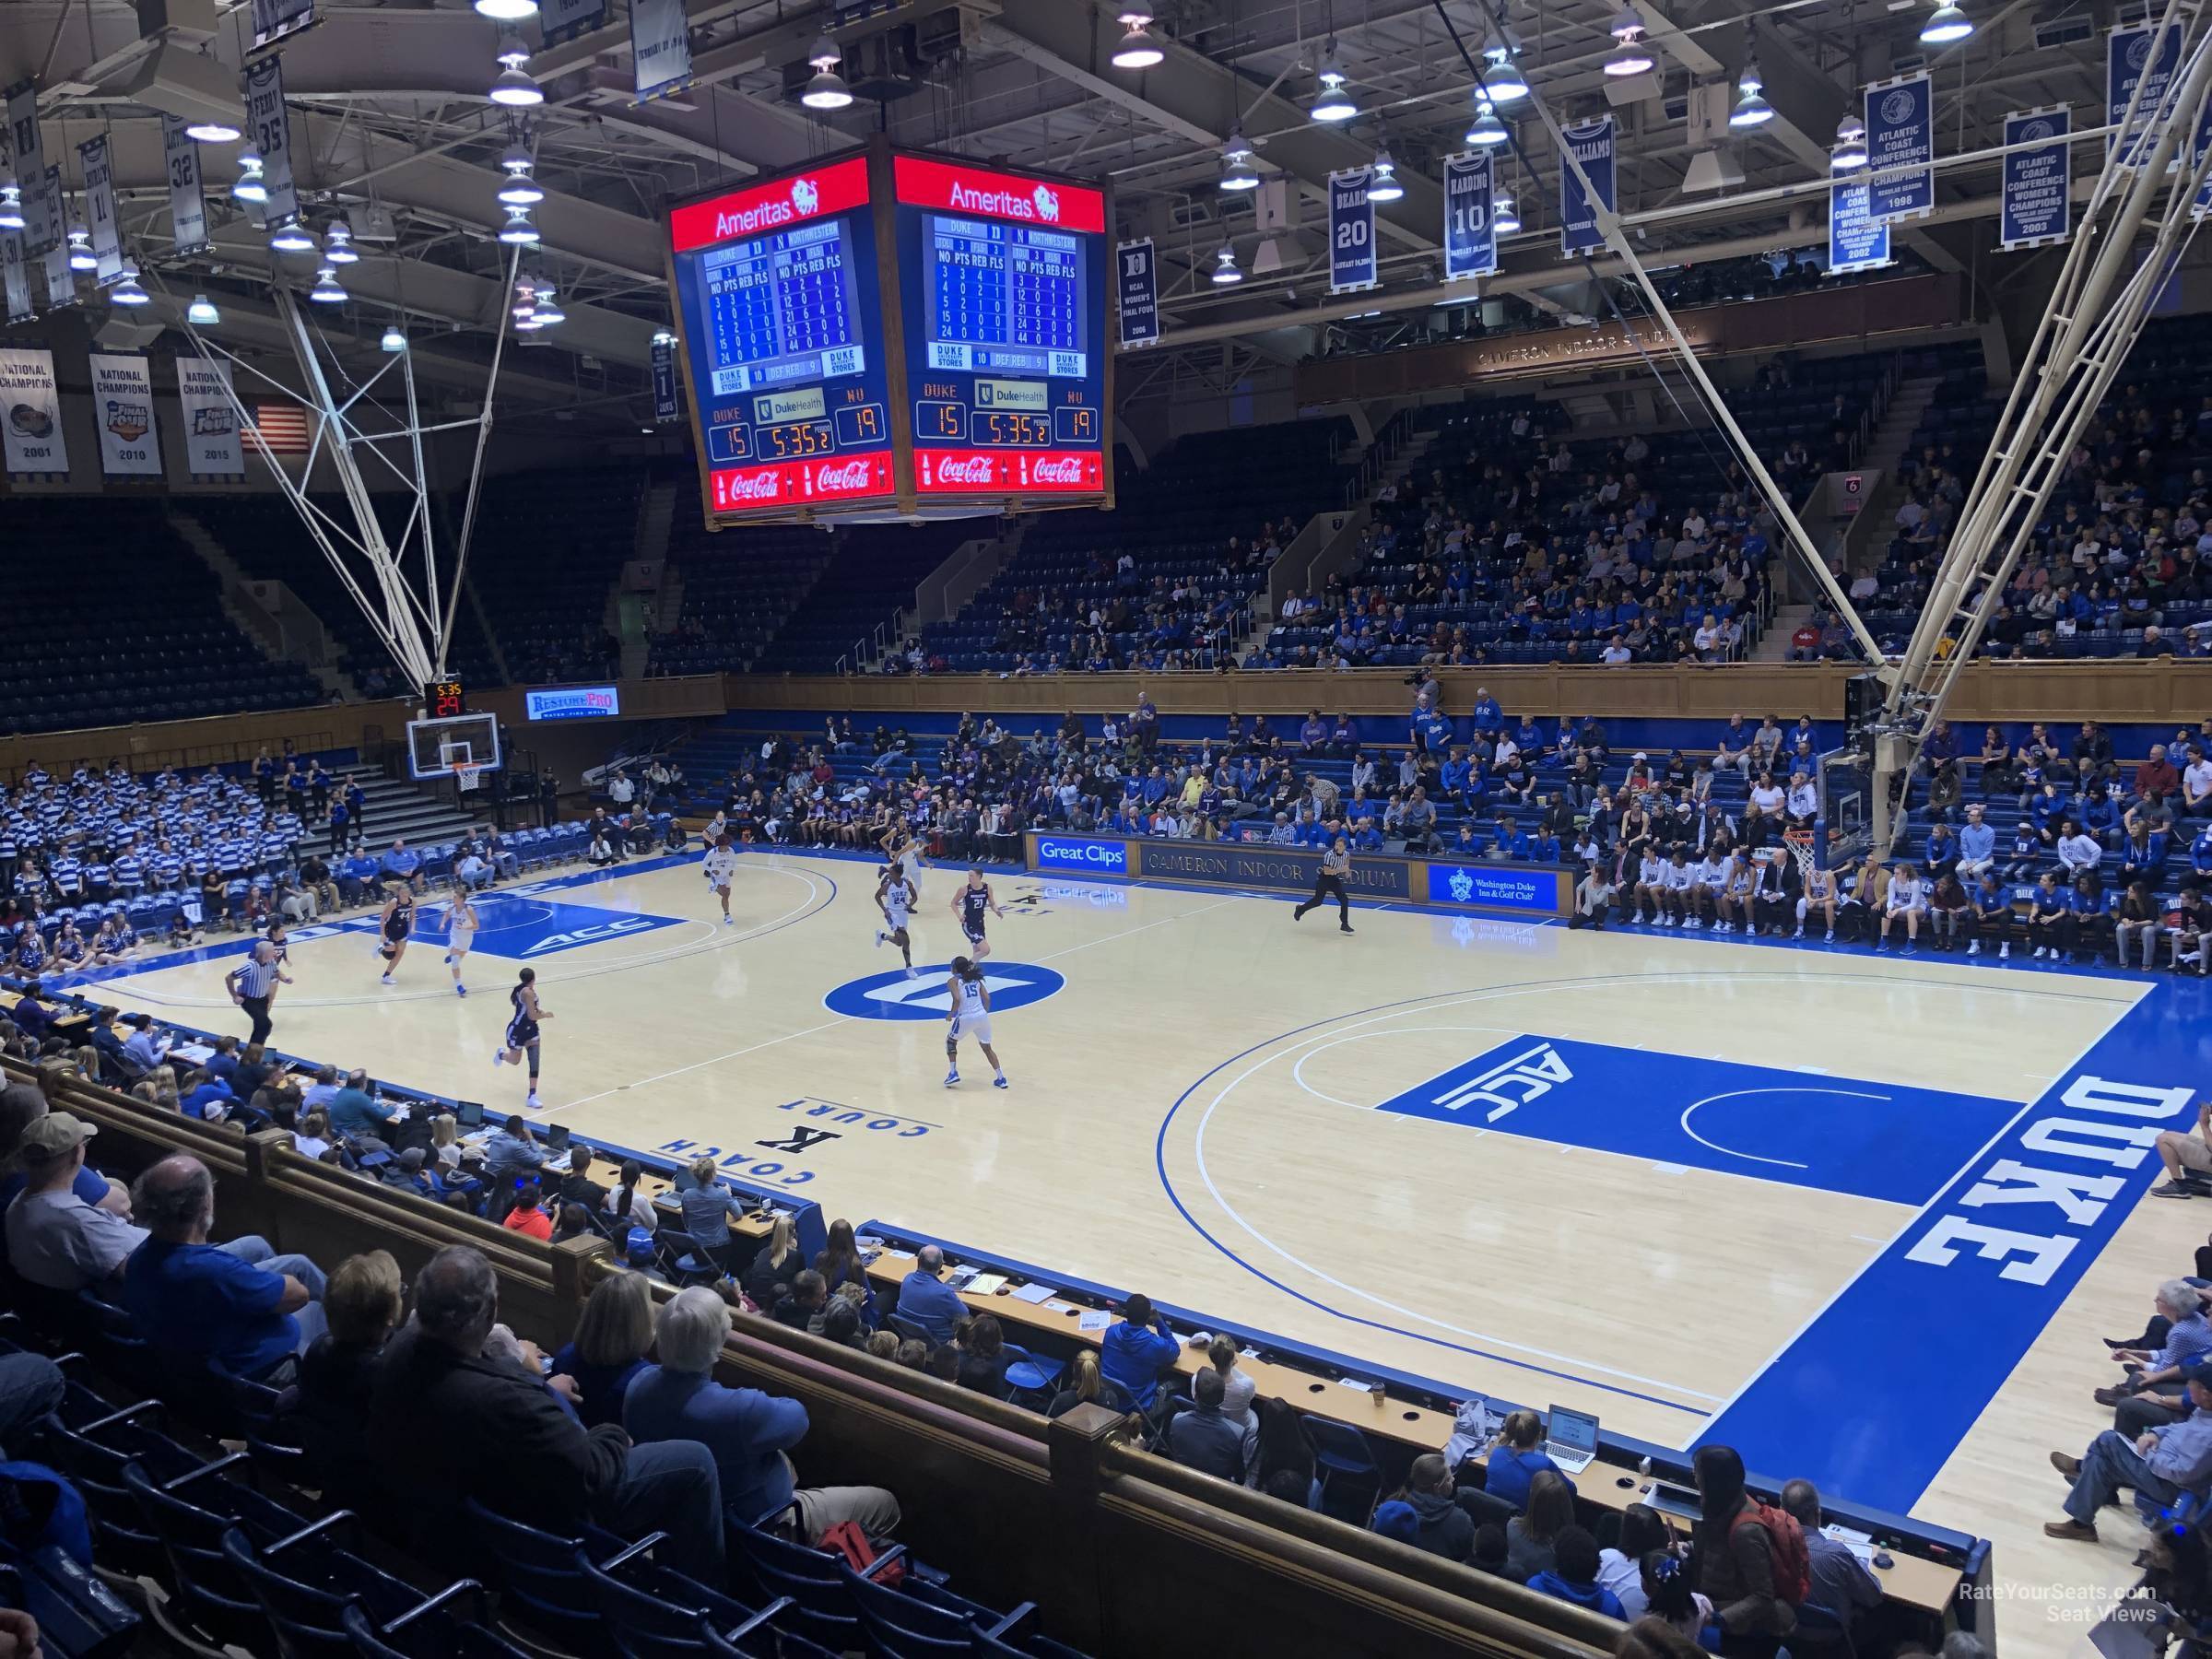 Section 16 at Cameron Indoor Arena - RateYourSeats.com